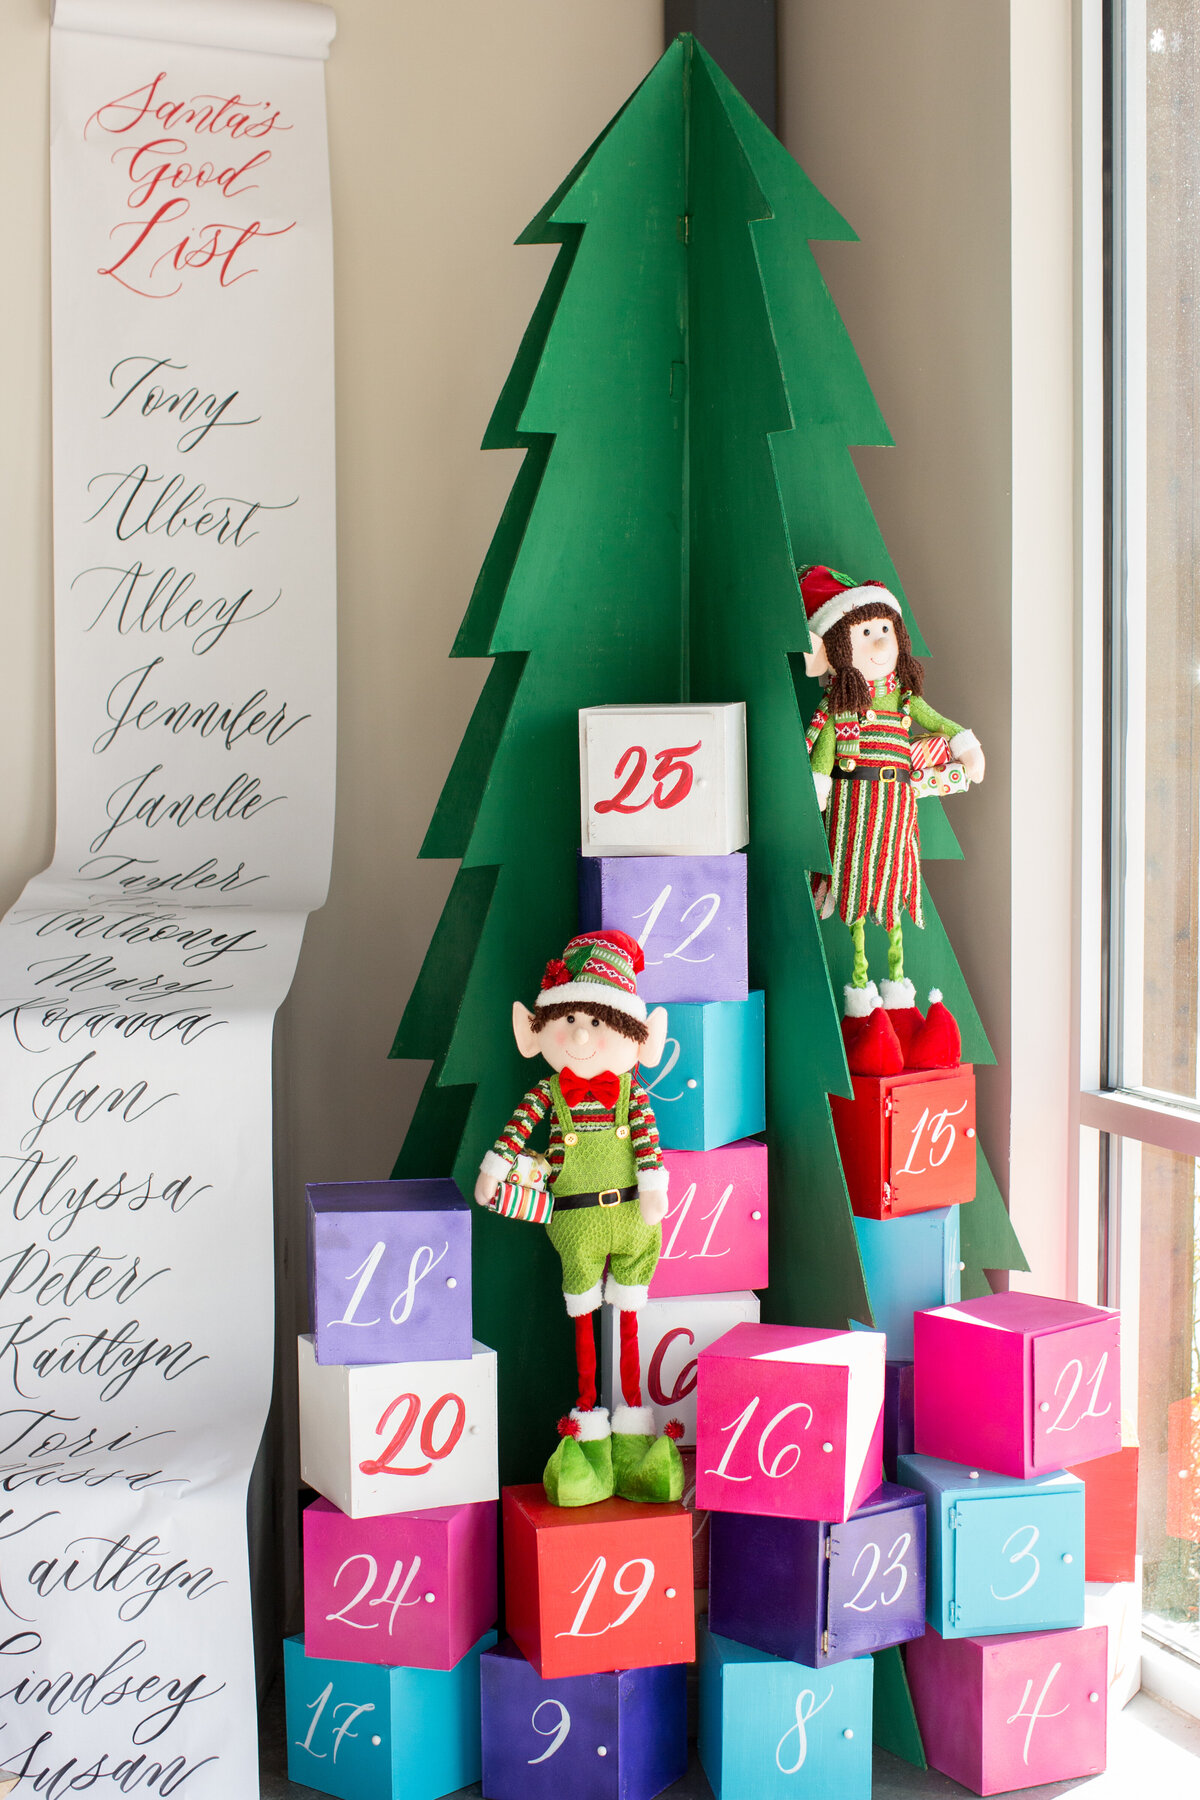 Festive 25 Days of Christmas themed display with Santa's list and colorful boxes